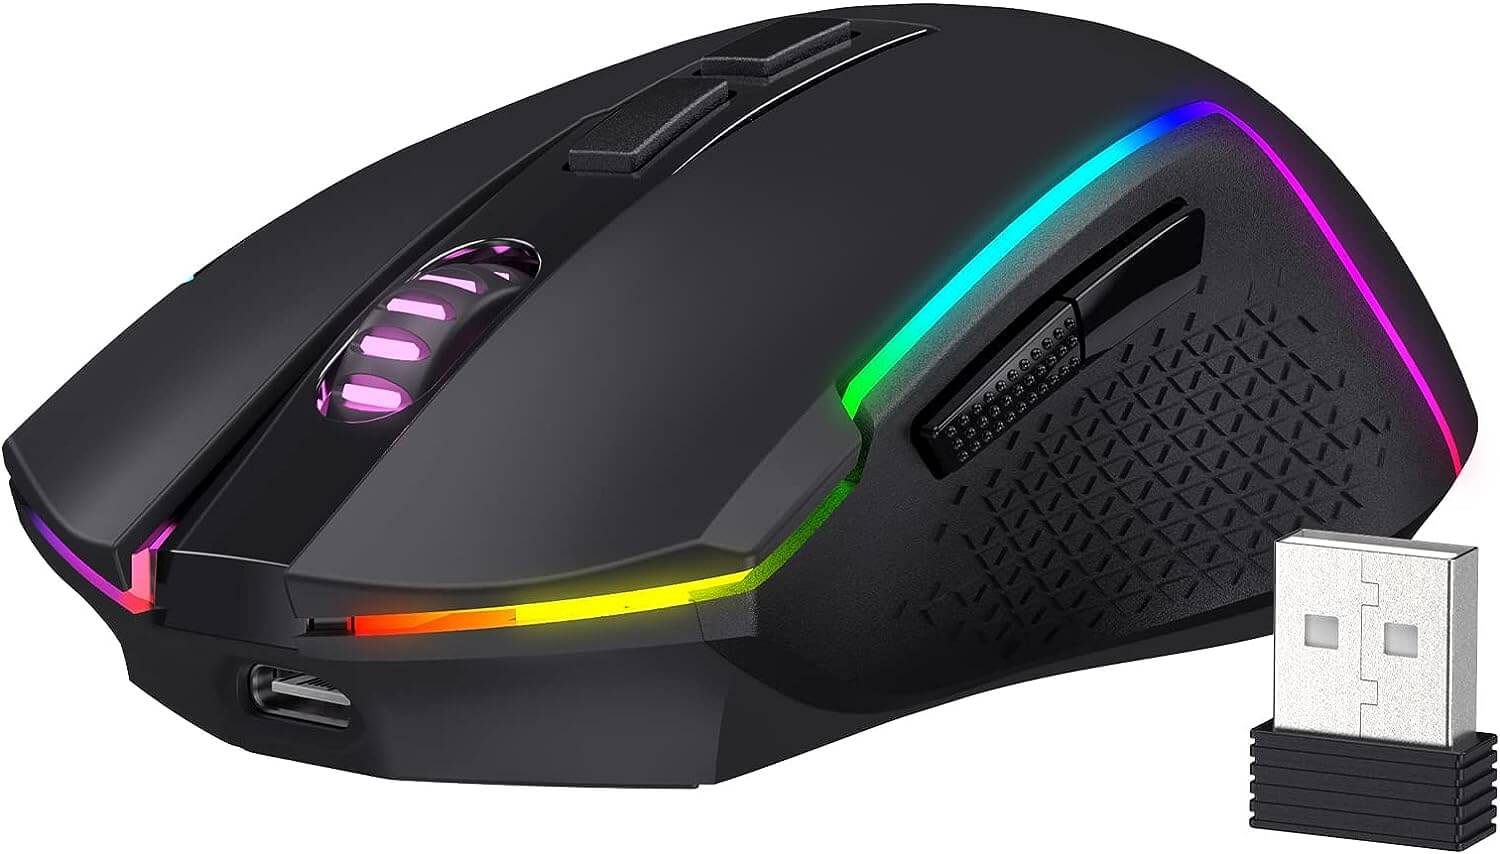 Redragon M693 Trident Pro Wireless Bluetooth Gaming Mouse, 8000 DPI Wired/Wireless Gamer Mouse w/ 3-Mode Connection, BT & 2.4G Wireless, 7 Macro Buttons, Durable Power Capacity for PC/Mac/Laptop